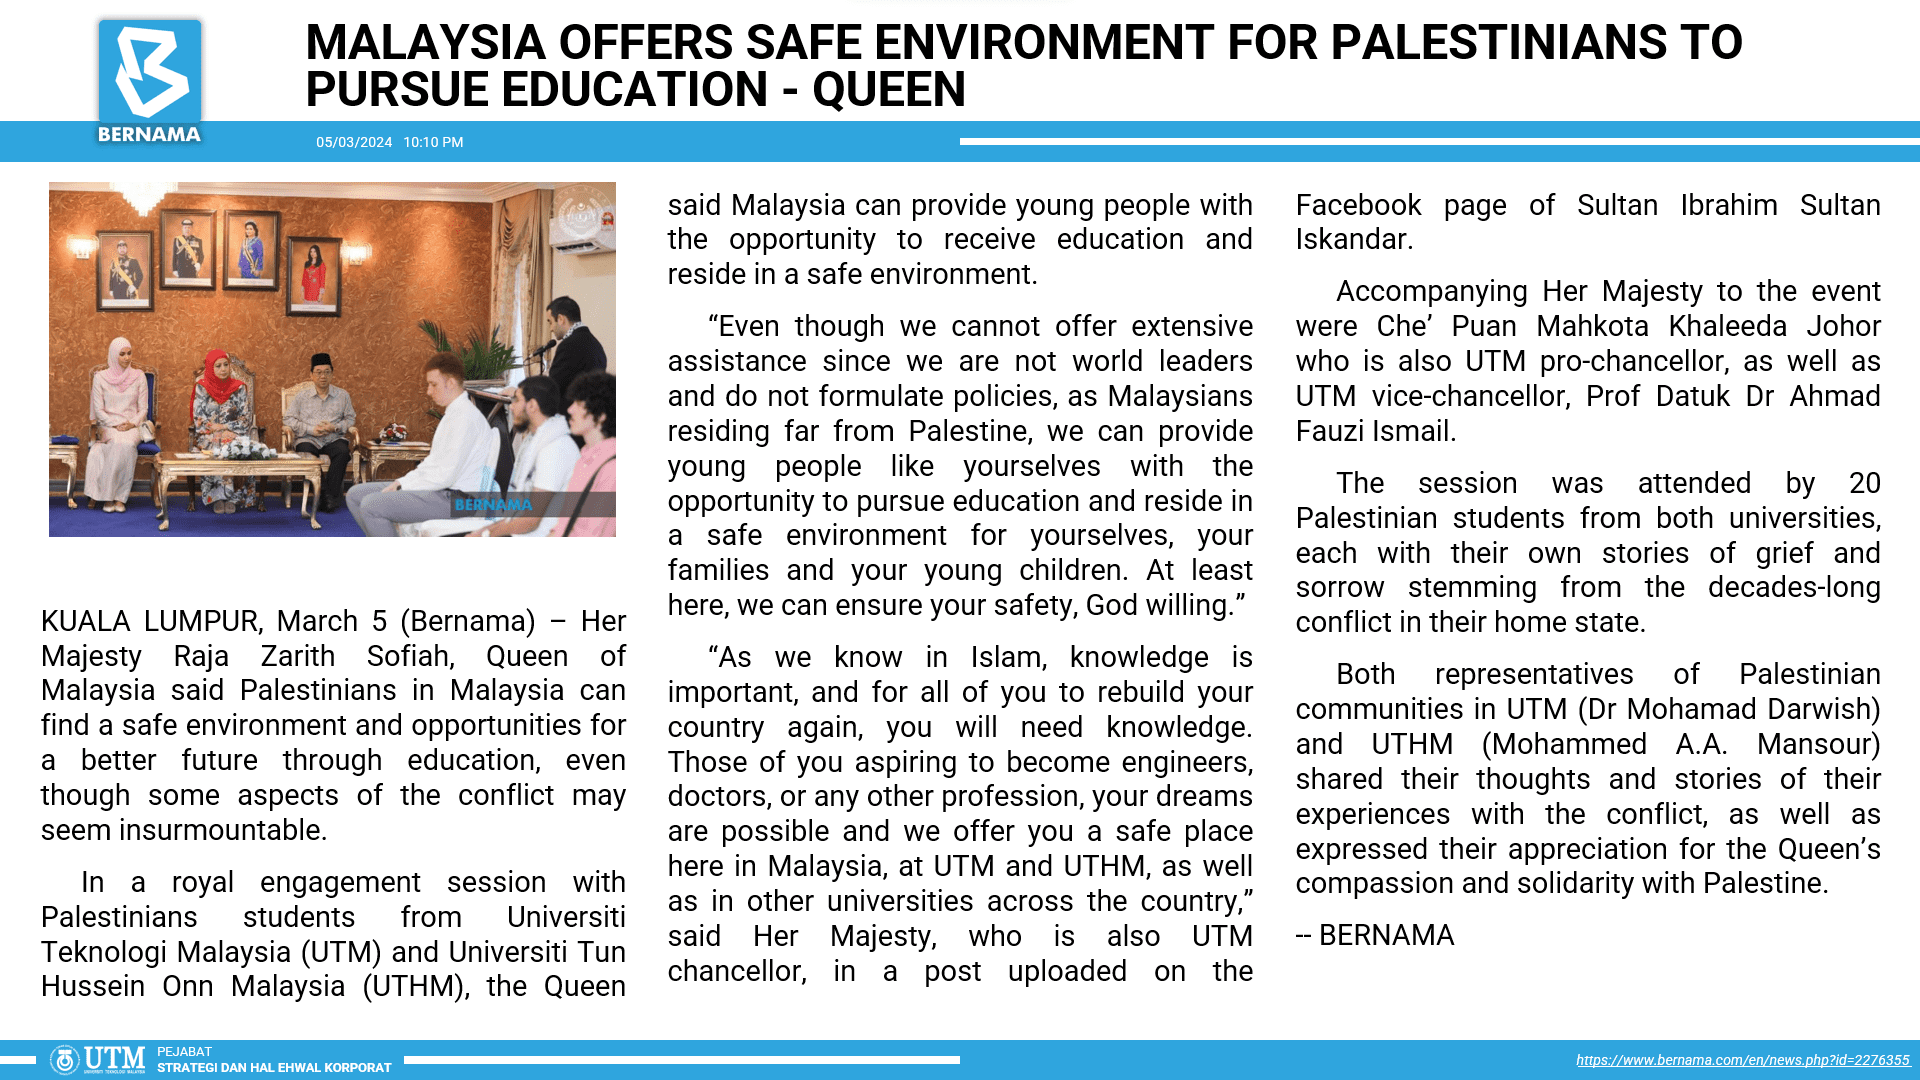 MALAYSIA OFFERS SAFE ENVIRONMENT FOR PALESTINIANS TO PURSUE EDUCATION QUEEN [BERNAMA]